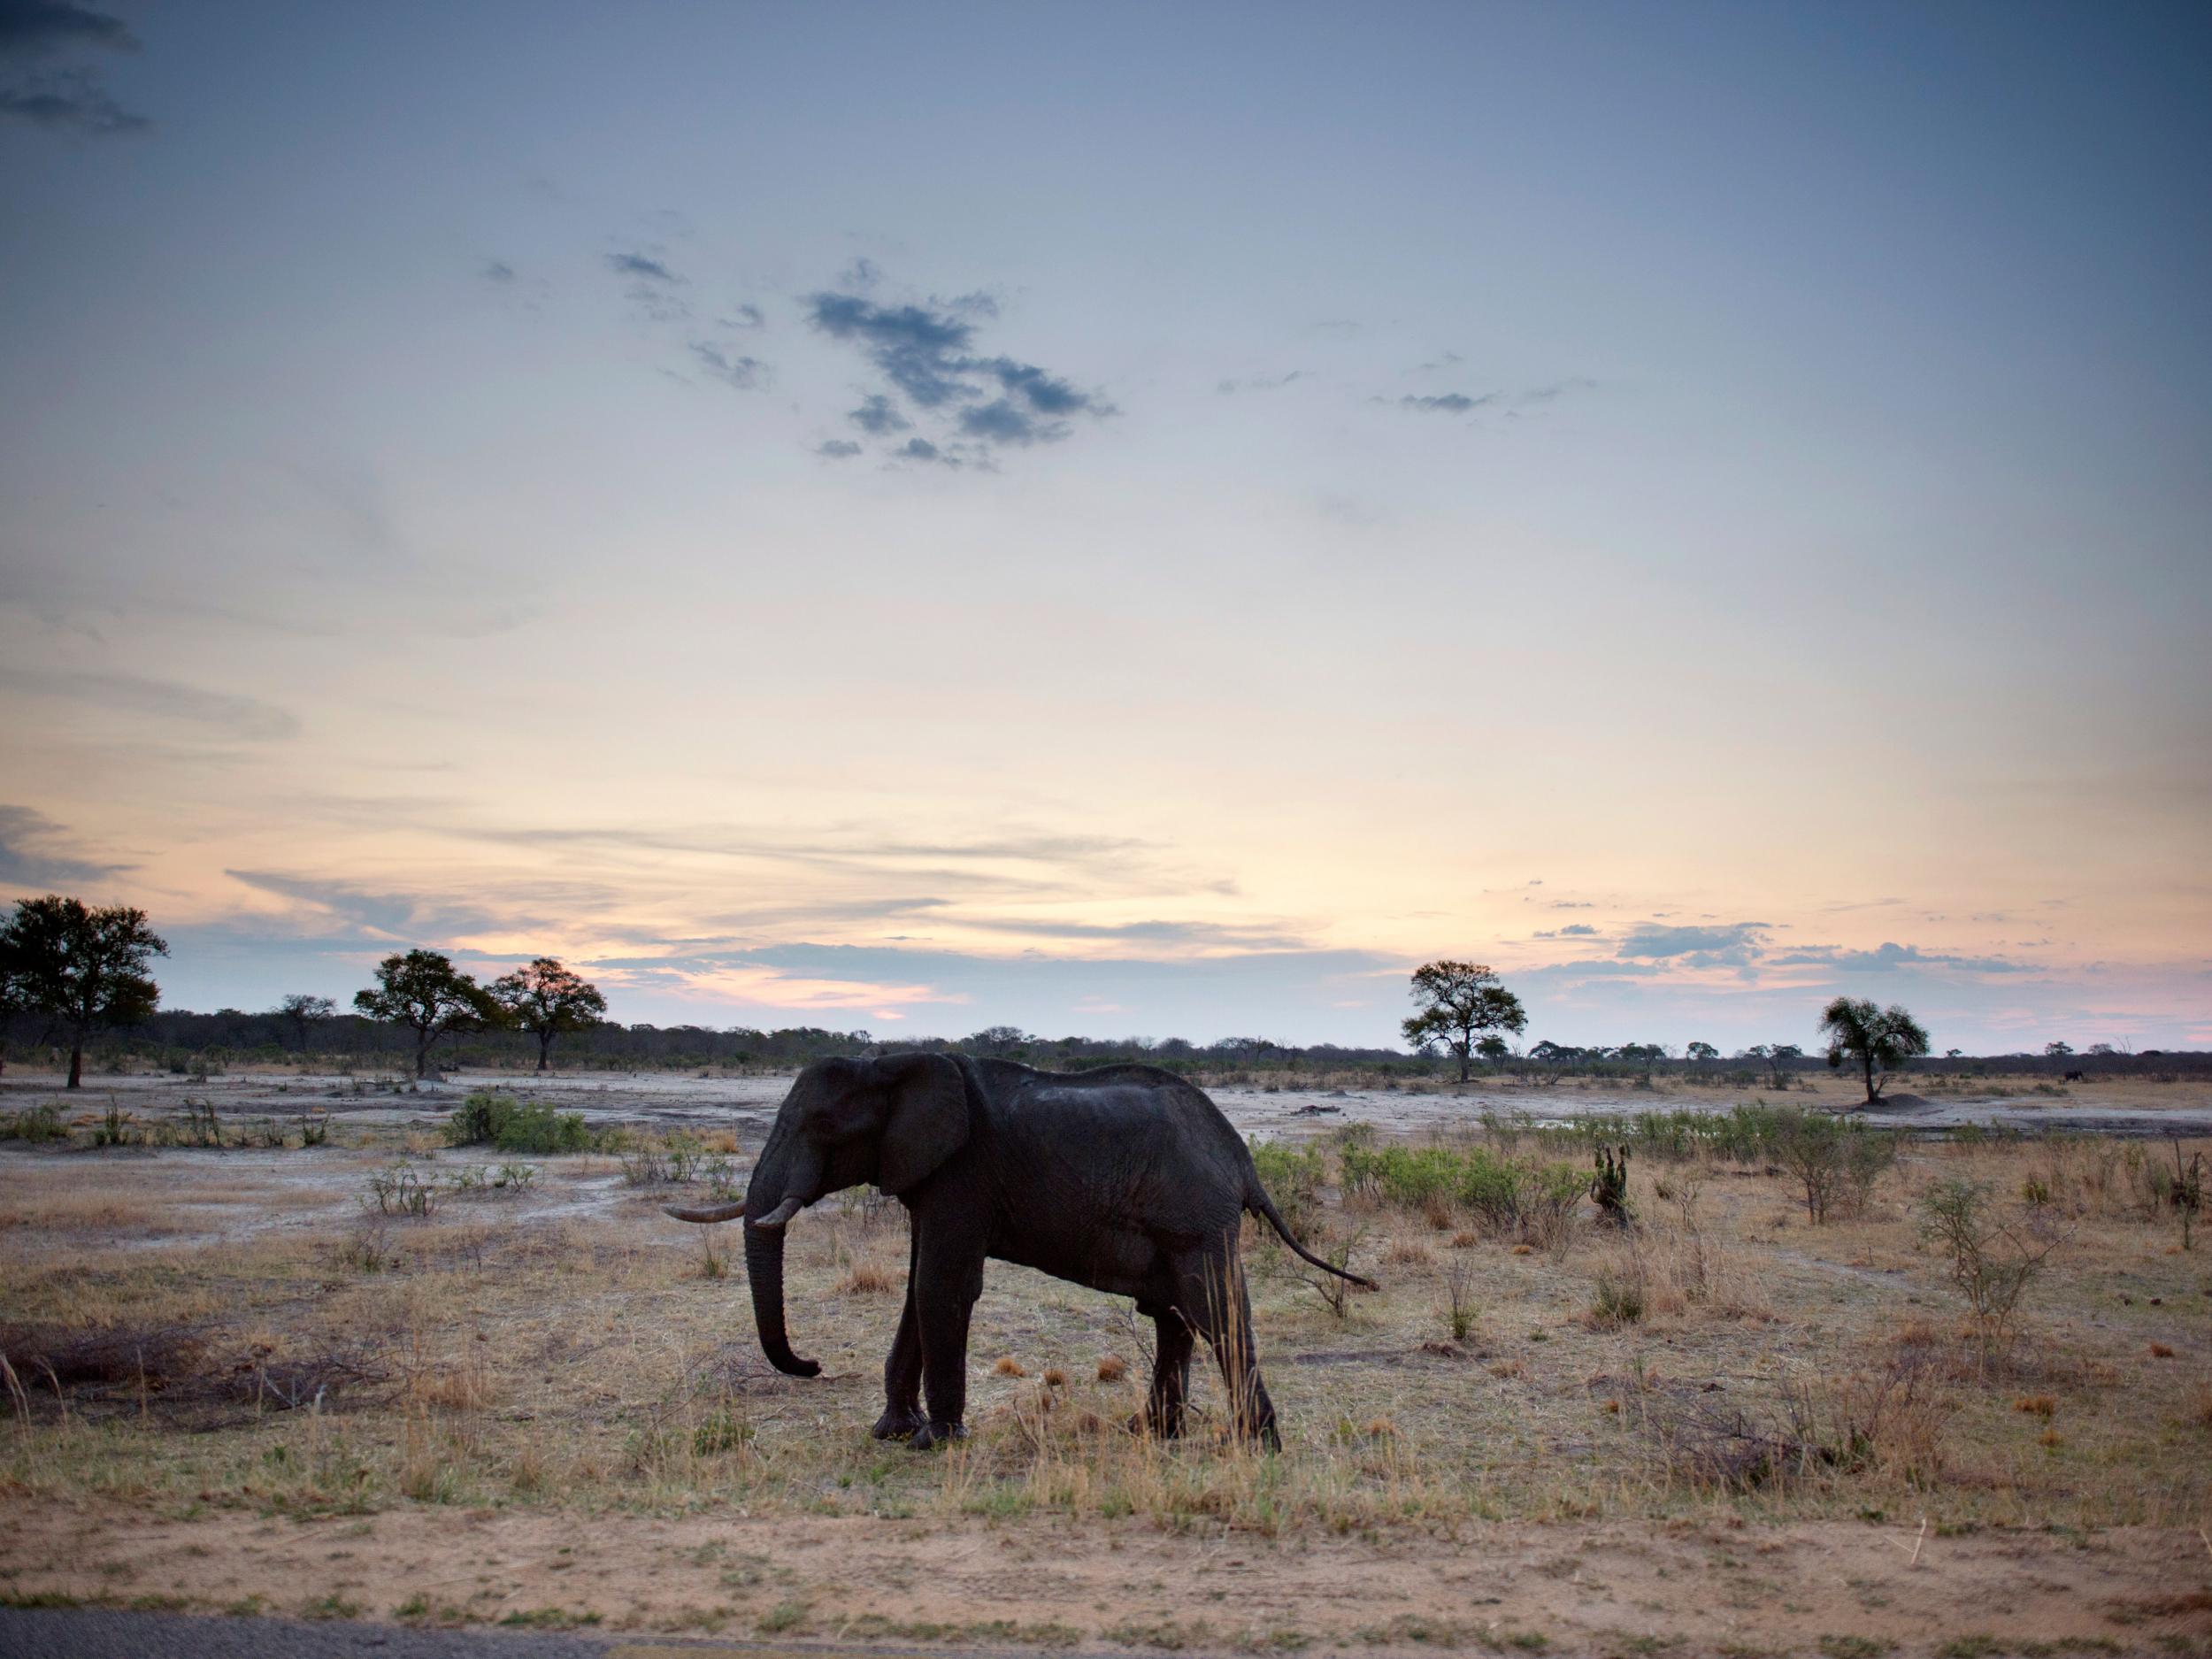 An African elephant in Hwange National Park in Zimbabwe